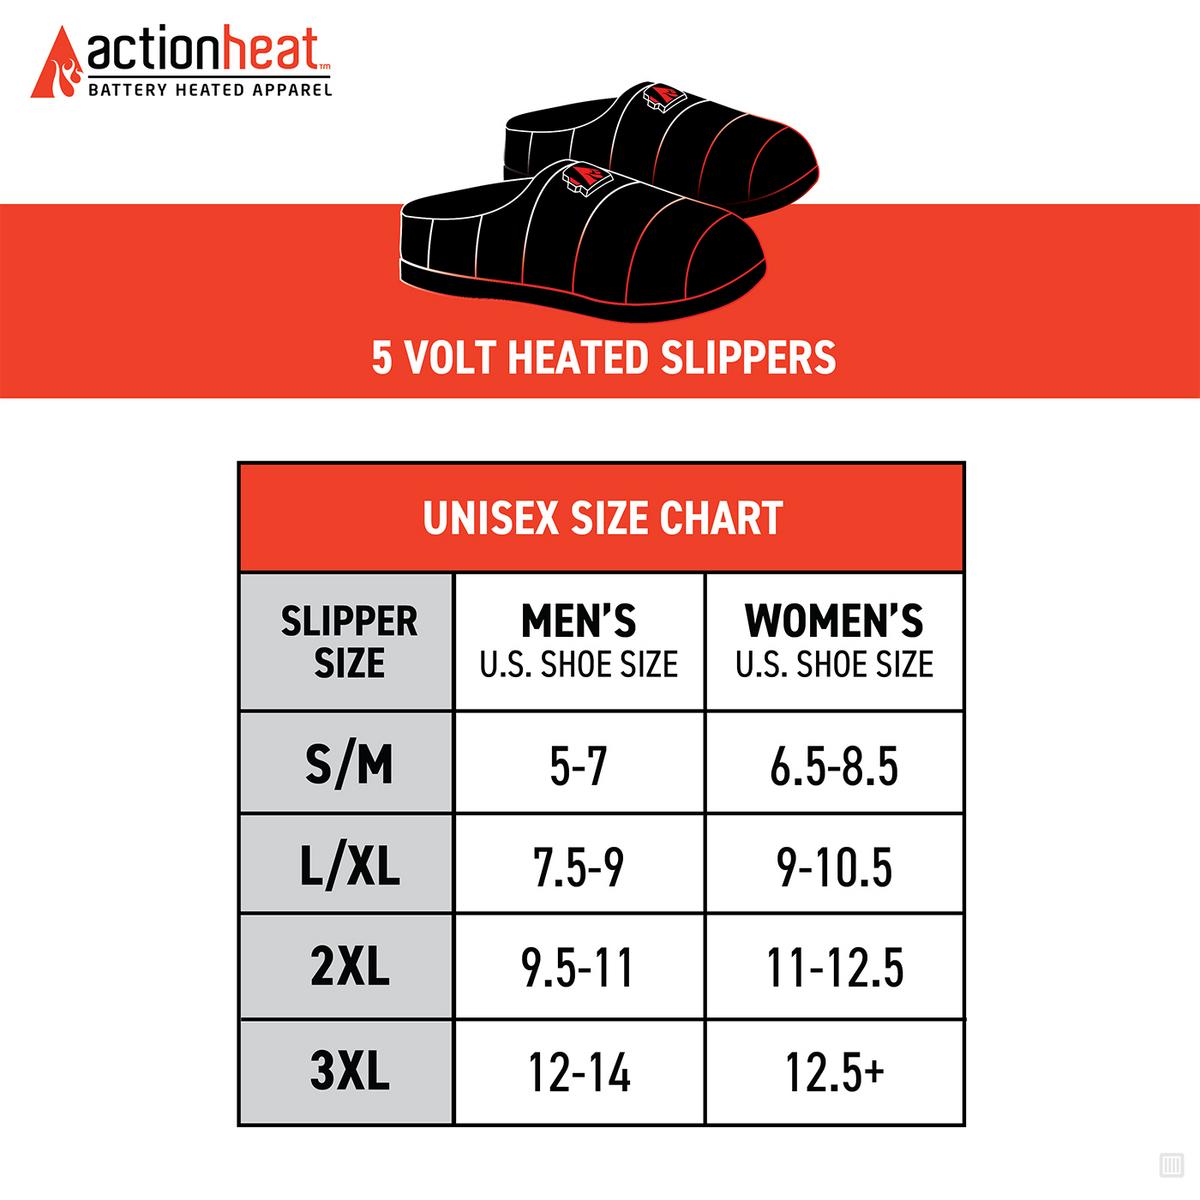 ActionHeat 5V Battery Heated Slippers - Battery